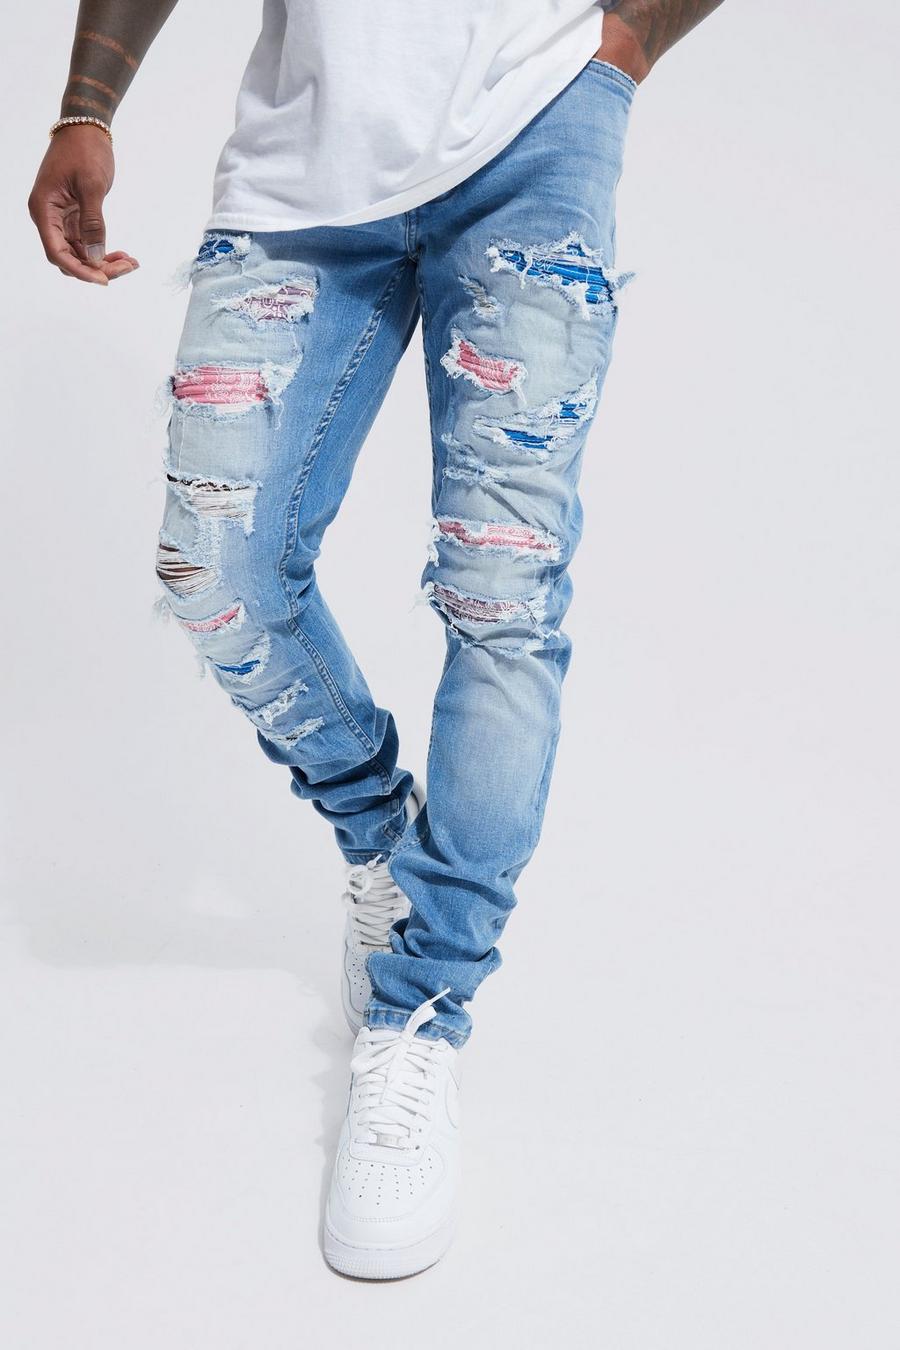 Good For Nothing skinny jeans in light blue with bandana patches